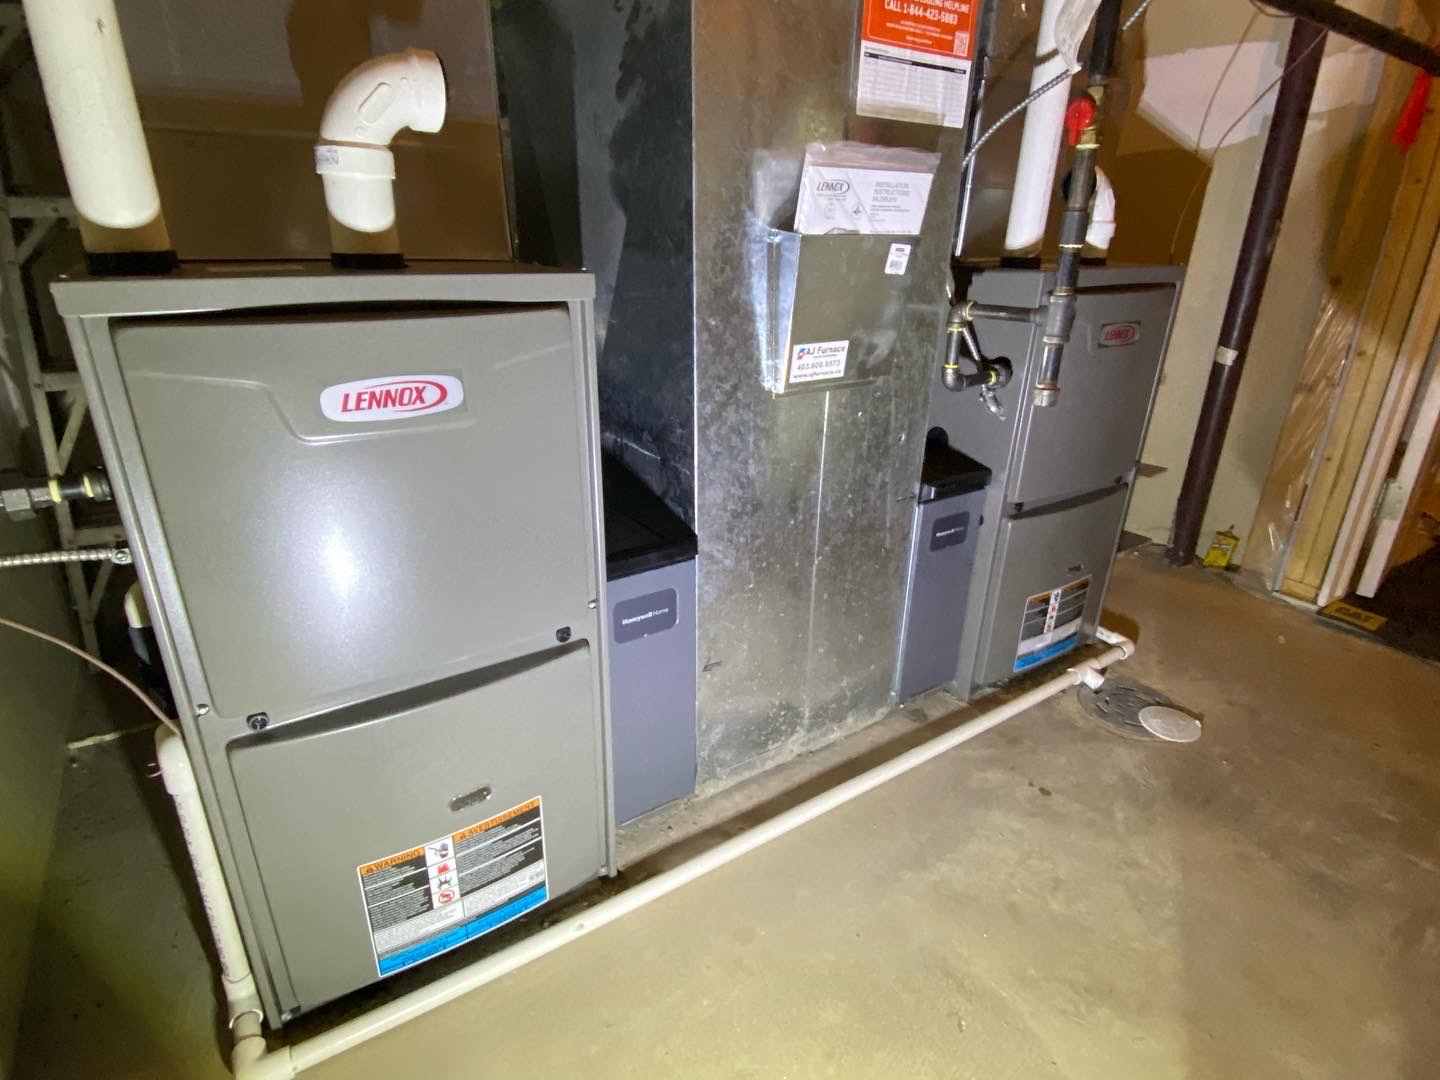 Lennox Furnace Services in Calgary